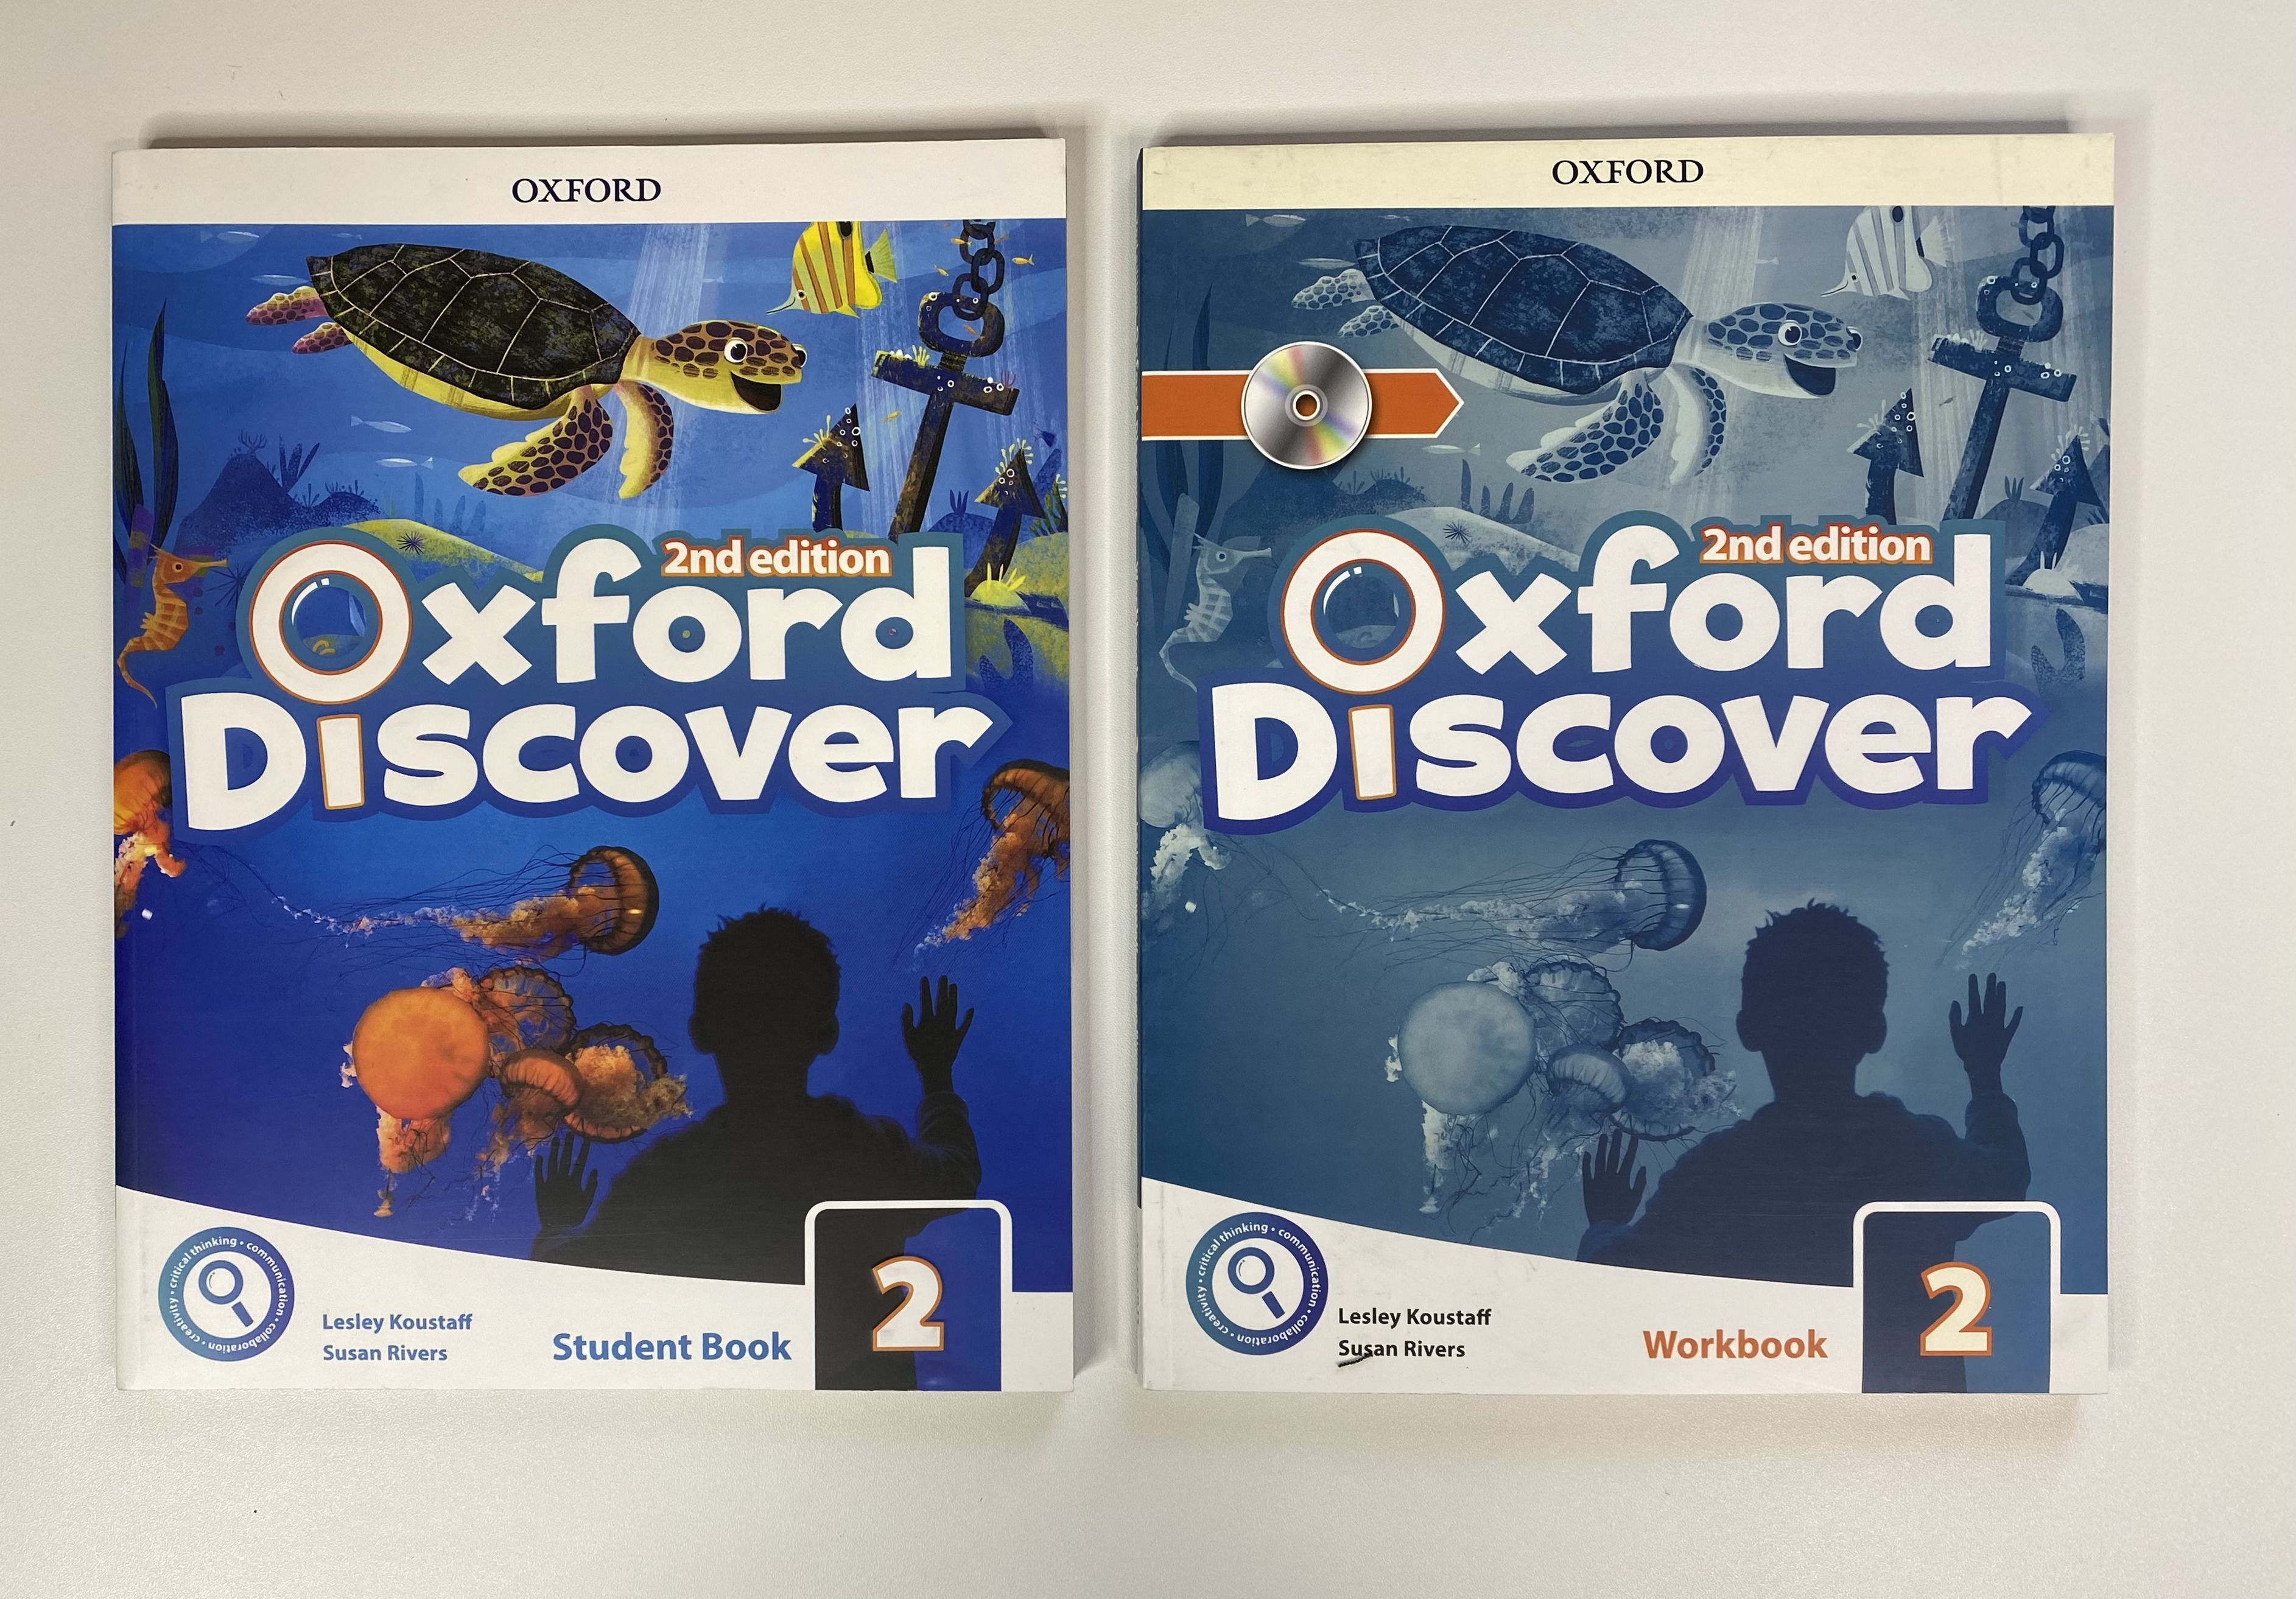 Oxford discover book. Oxford discover 2nd Edition. Oxford discover 3 2nd Edition. Учебник Oxford discover. Oxford discover 2nd Edition Listening 1 27.